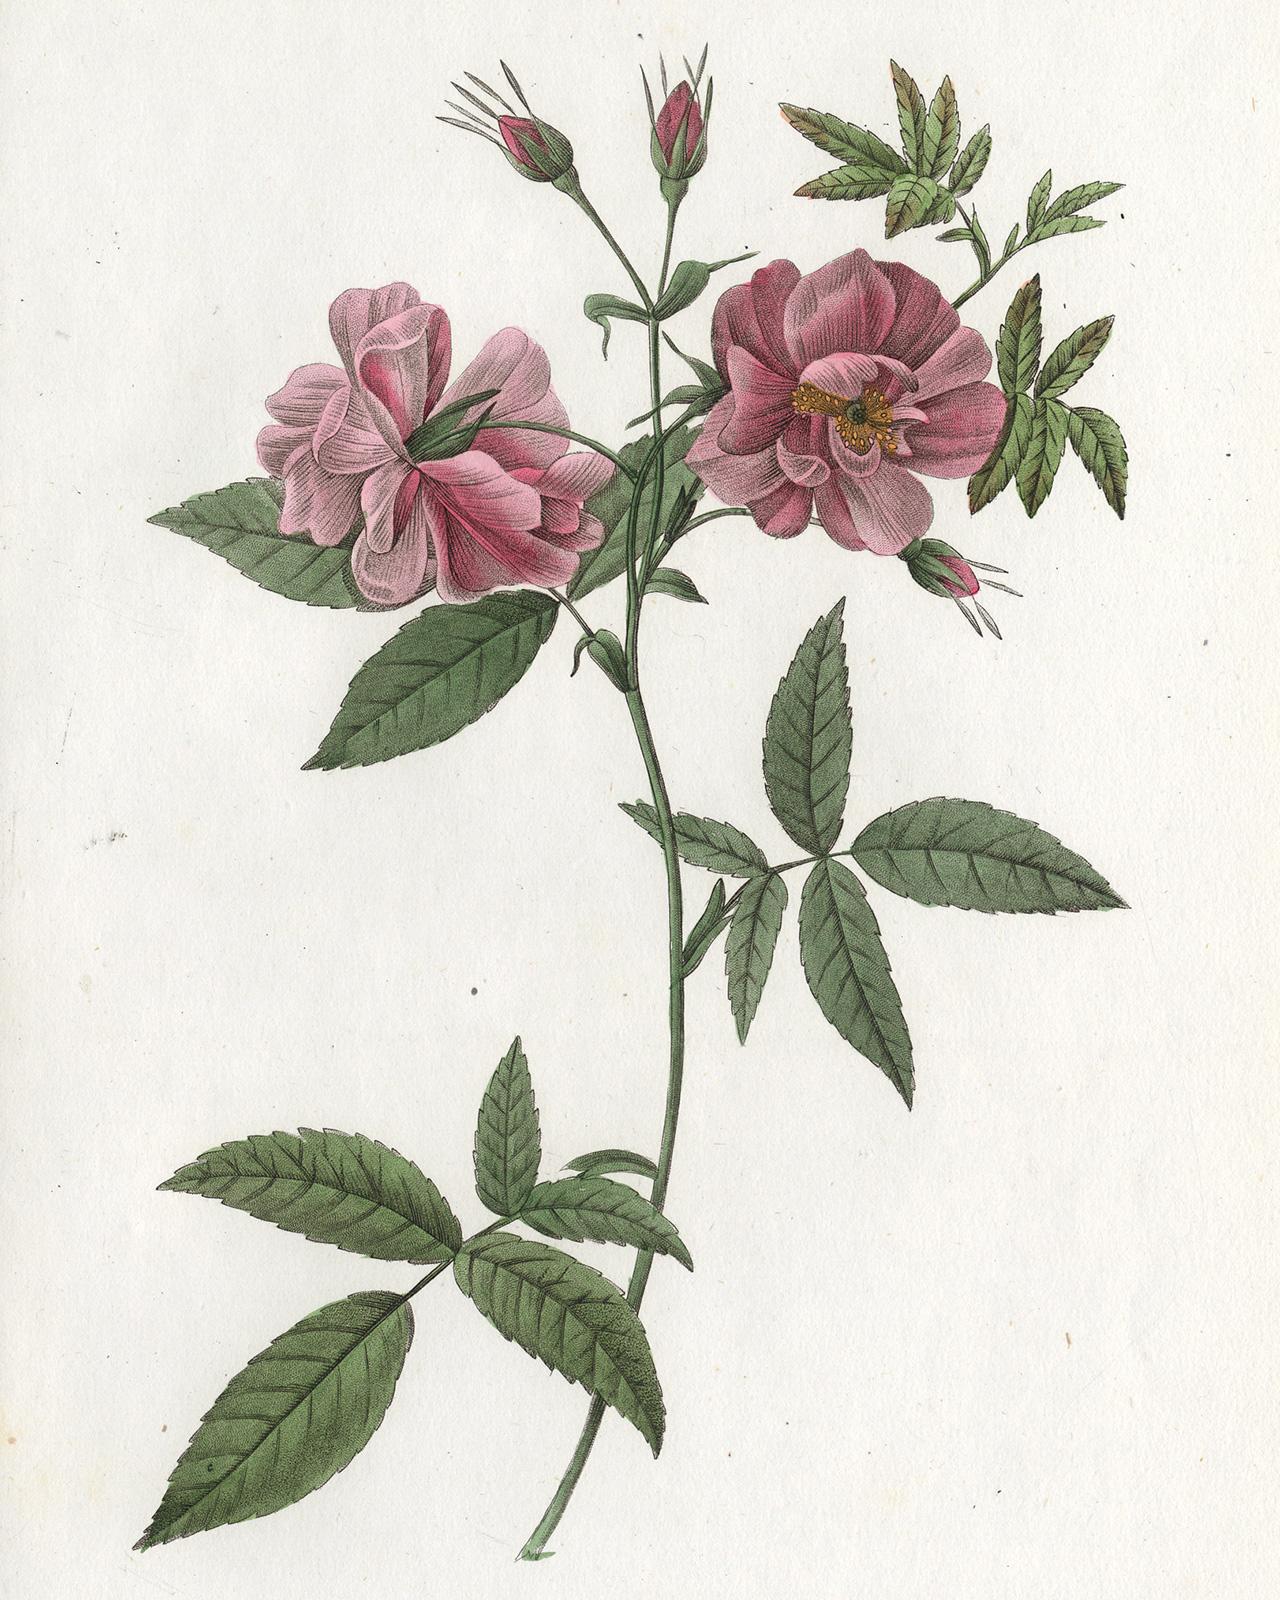 Marsh Rose by Redoute - Les Roses - Handcoloured engraving - 19th century - Print by Pierre-Joseph Redouté